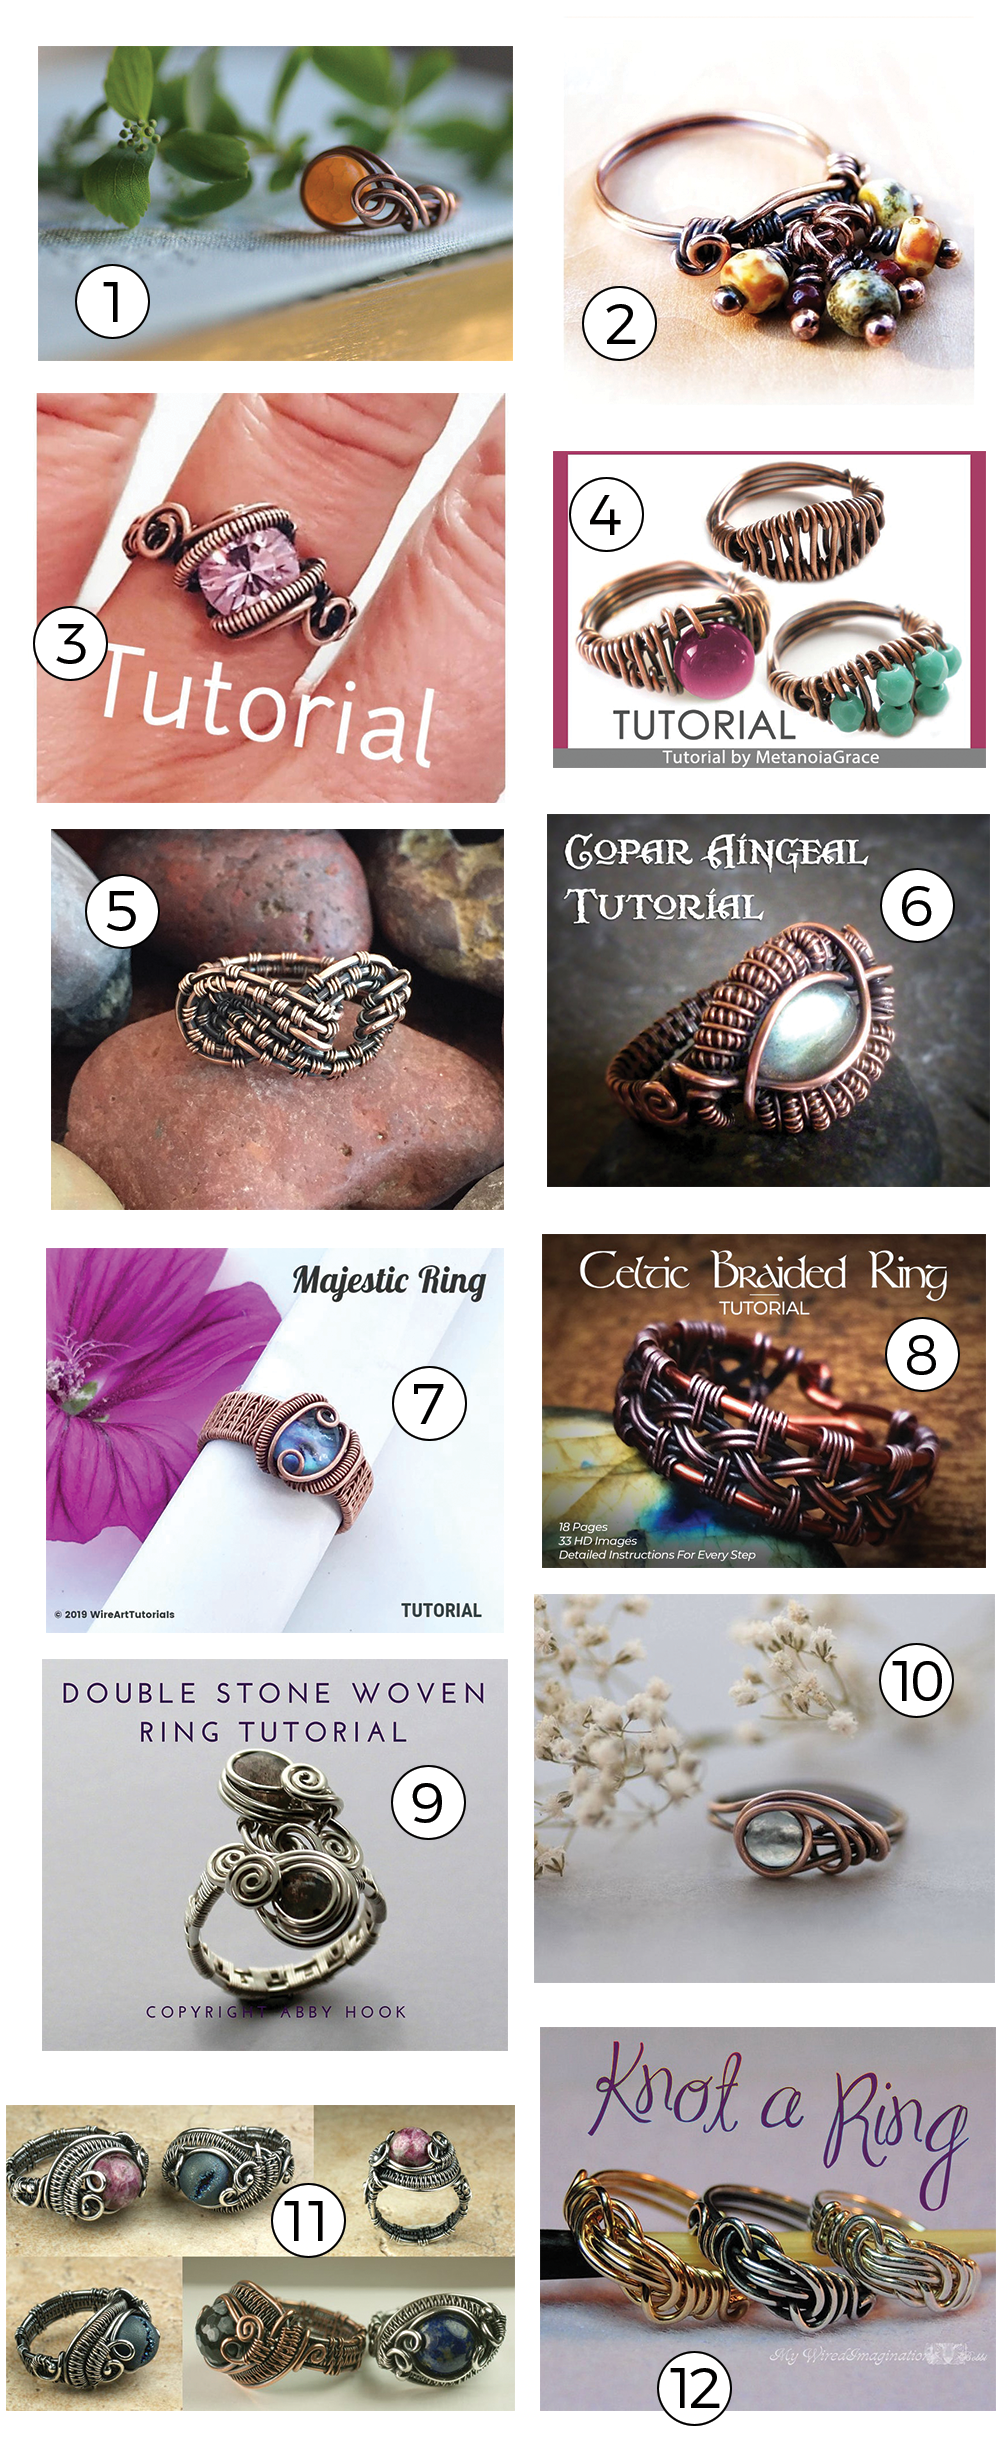 waterstof Herhaal Auto Wire-Wrapped Ring Tutorials - How to Wire-Wrap Rings | Studio 73 Designs